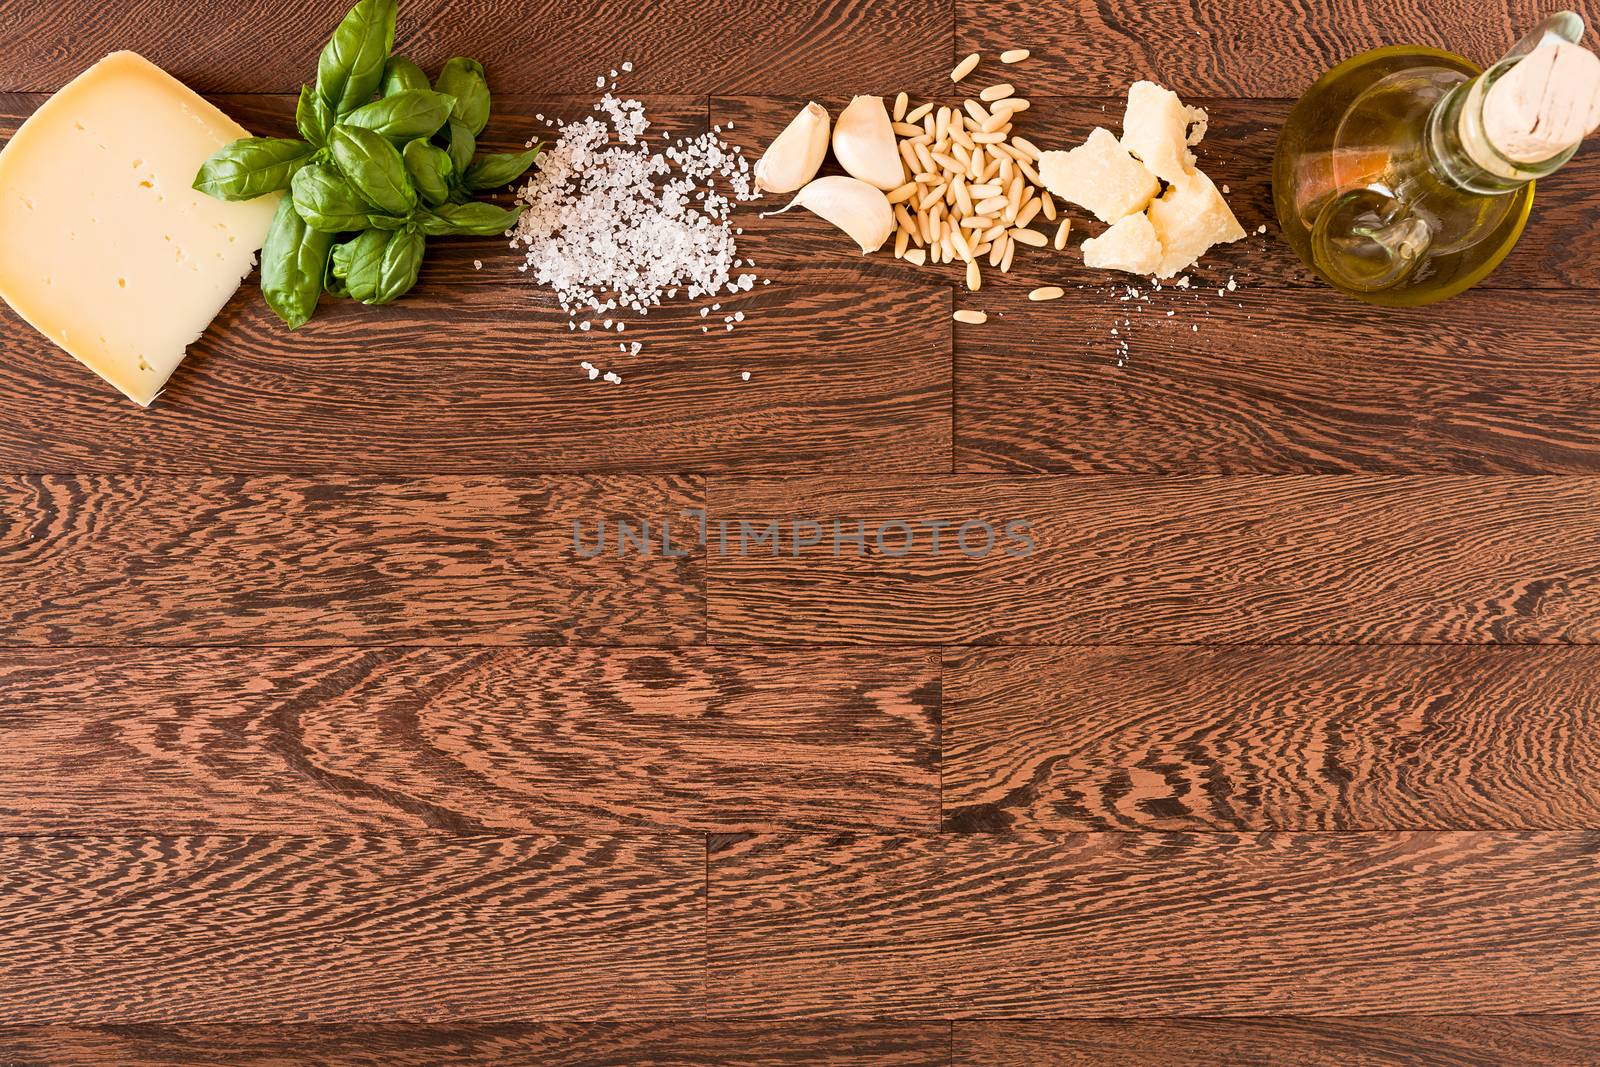 Natural ingredients for pesto genovese seen from above